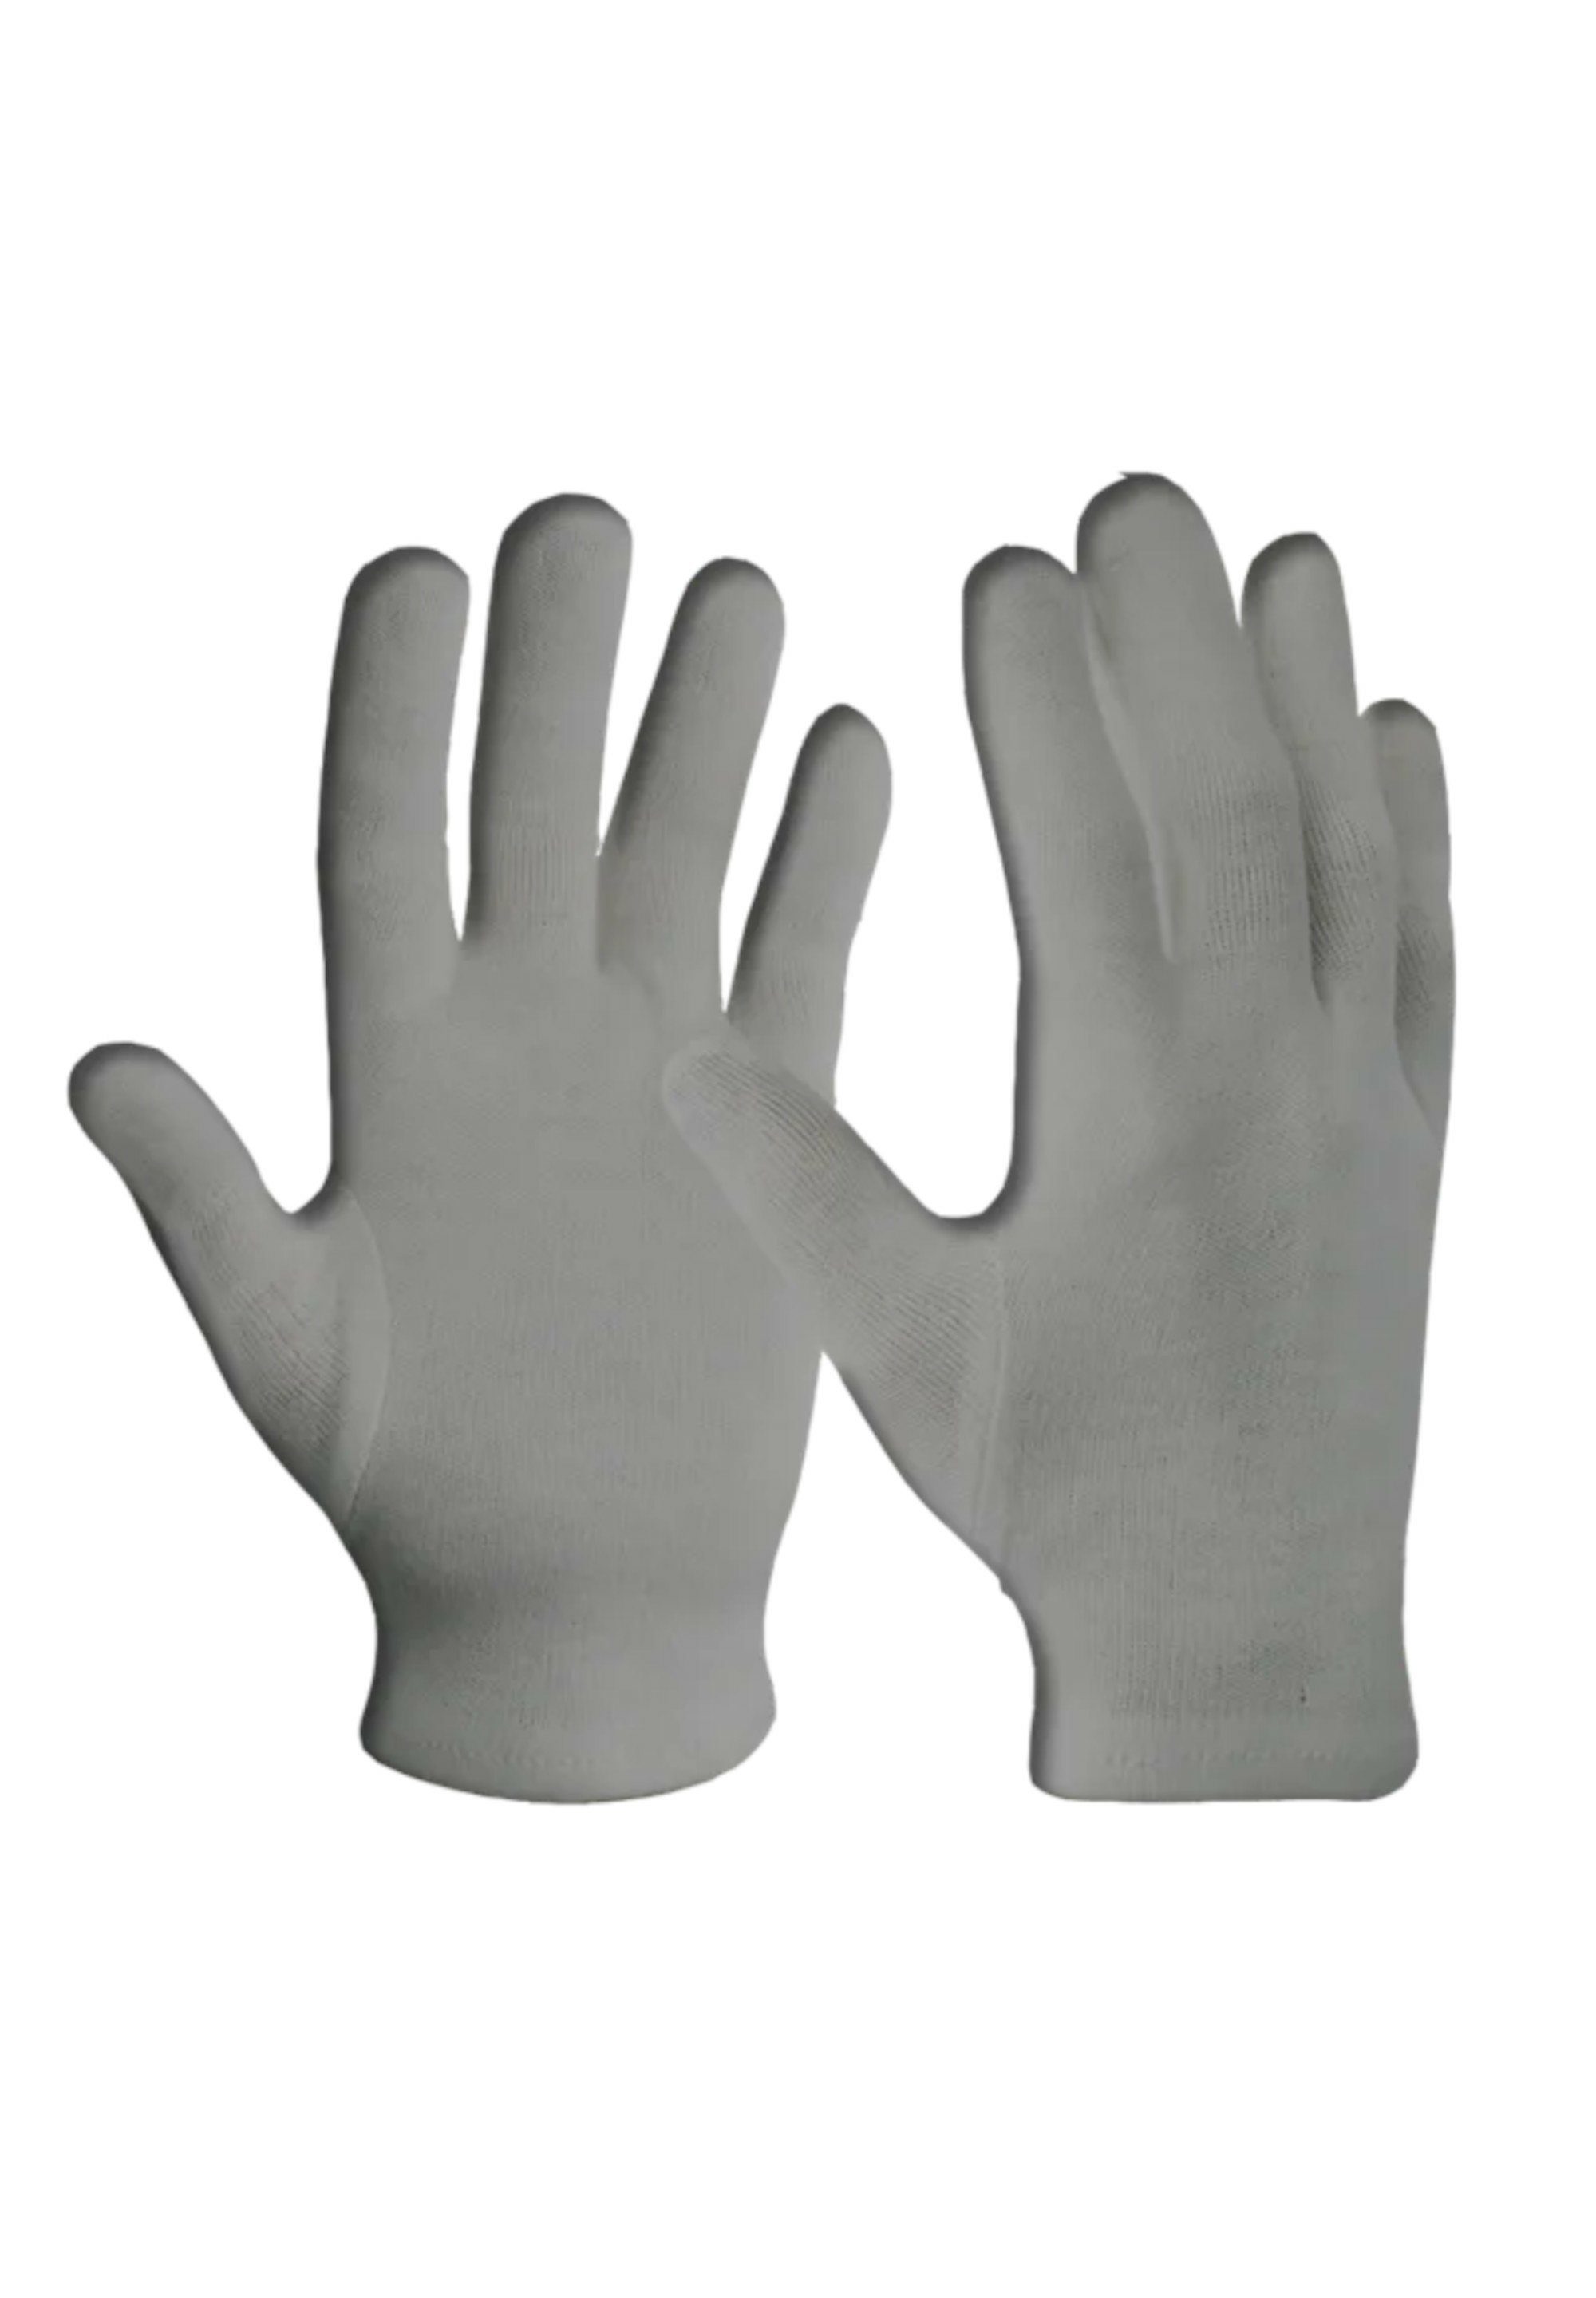 Zanier Multisporthandschuhe ANTIMICROBIAL PROTECTIVE GLOVE We focus on gloves | Trainingshandschuhe